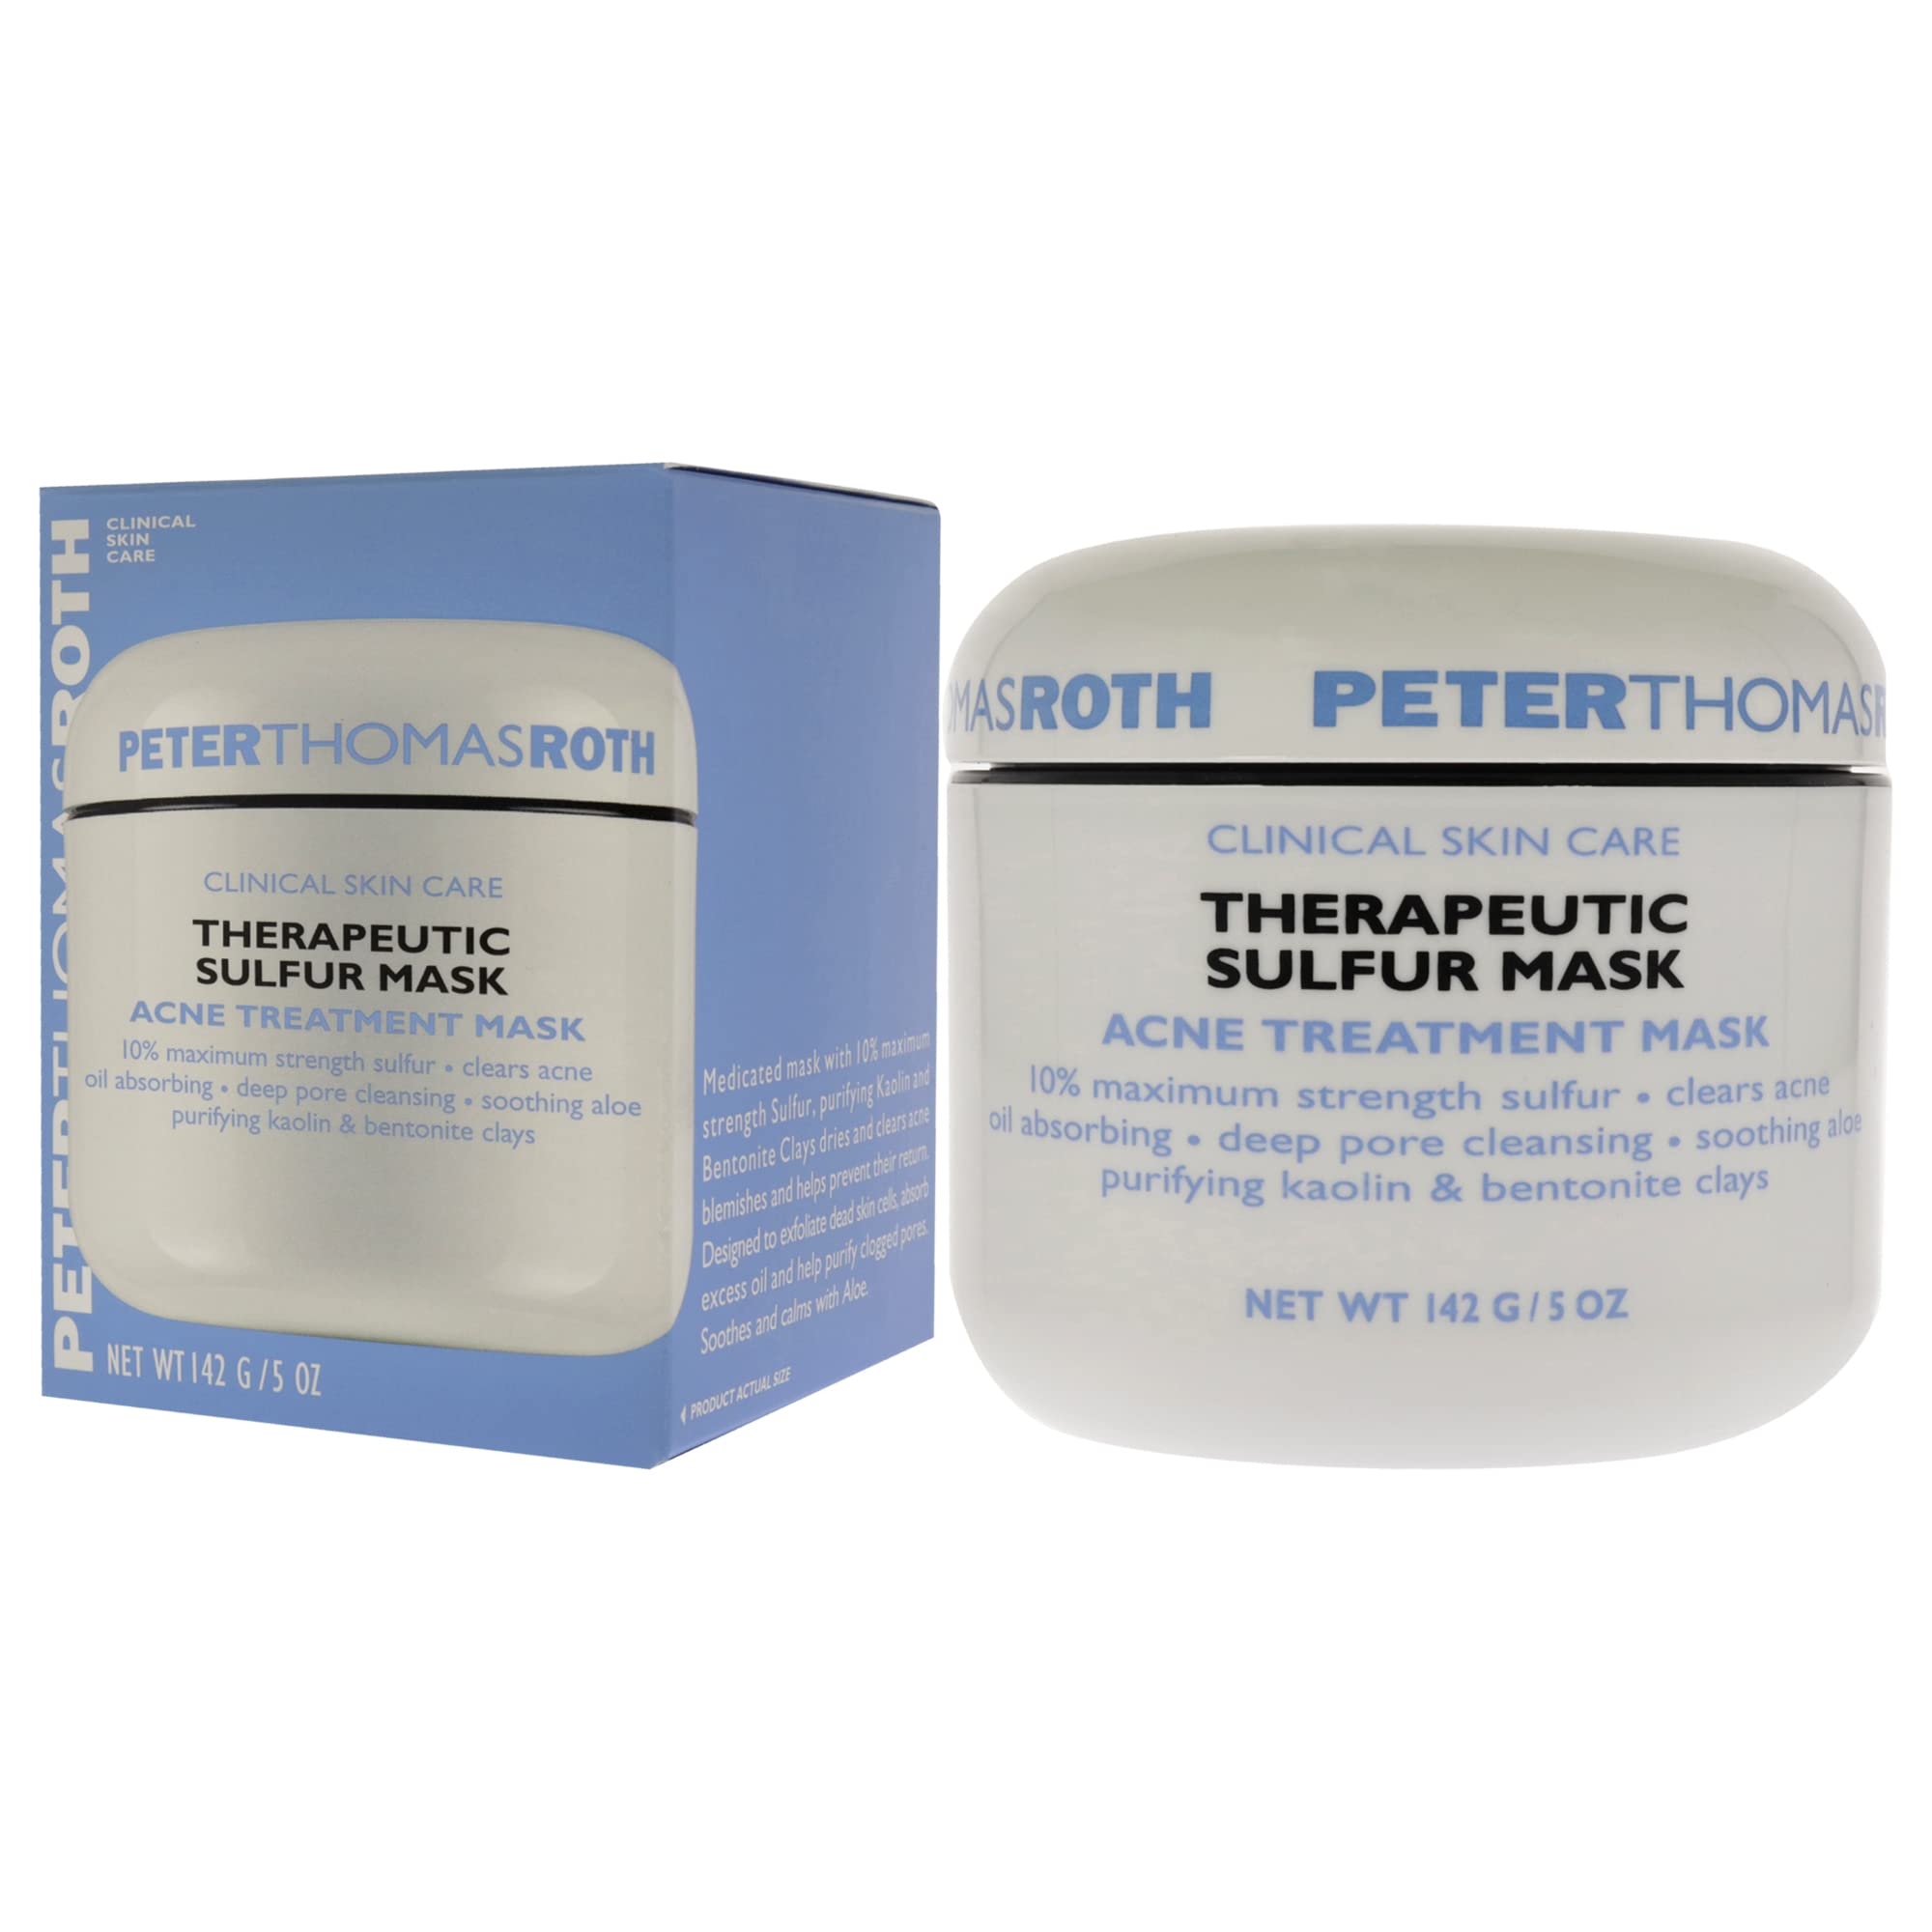 Peter Thomas Roth | Therapeutic Sulfur Acne Treatment Mask | Maximum-Strength Sulfur Mask for Acne, Clears Up and Helps Prevent Acne Blemishes, Oil Absorbing and Pore Cleansing